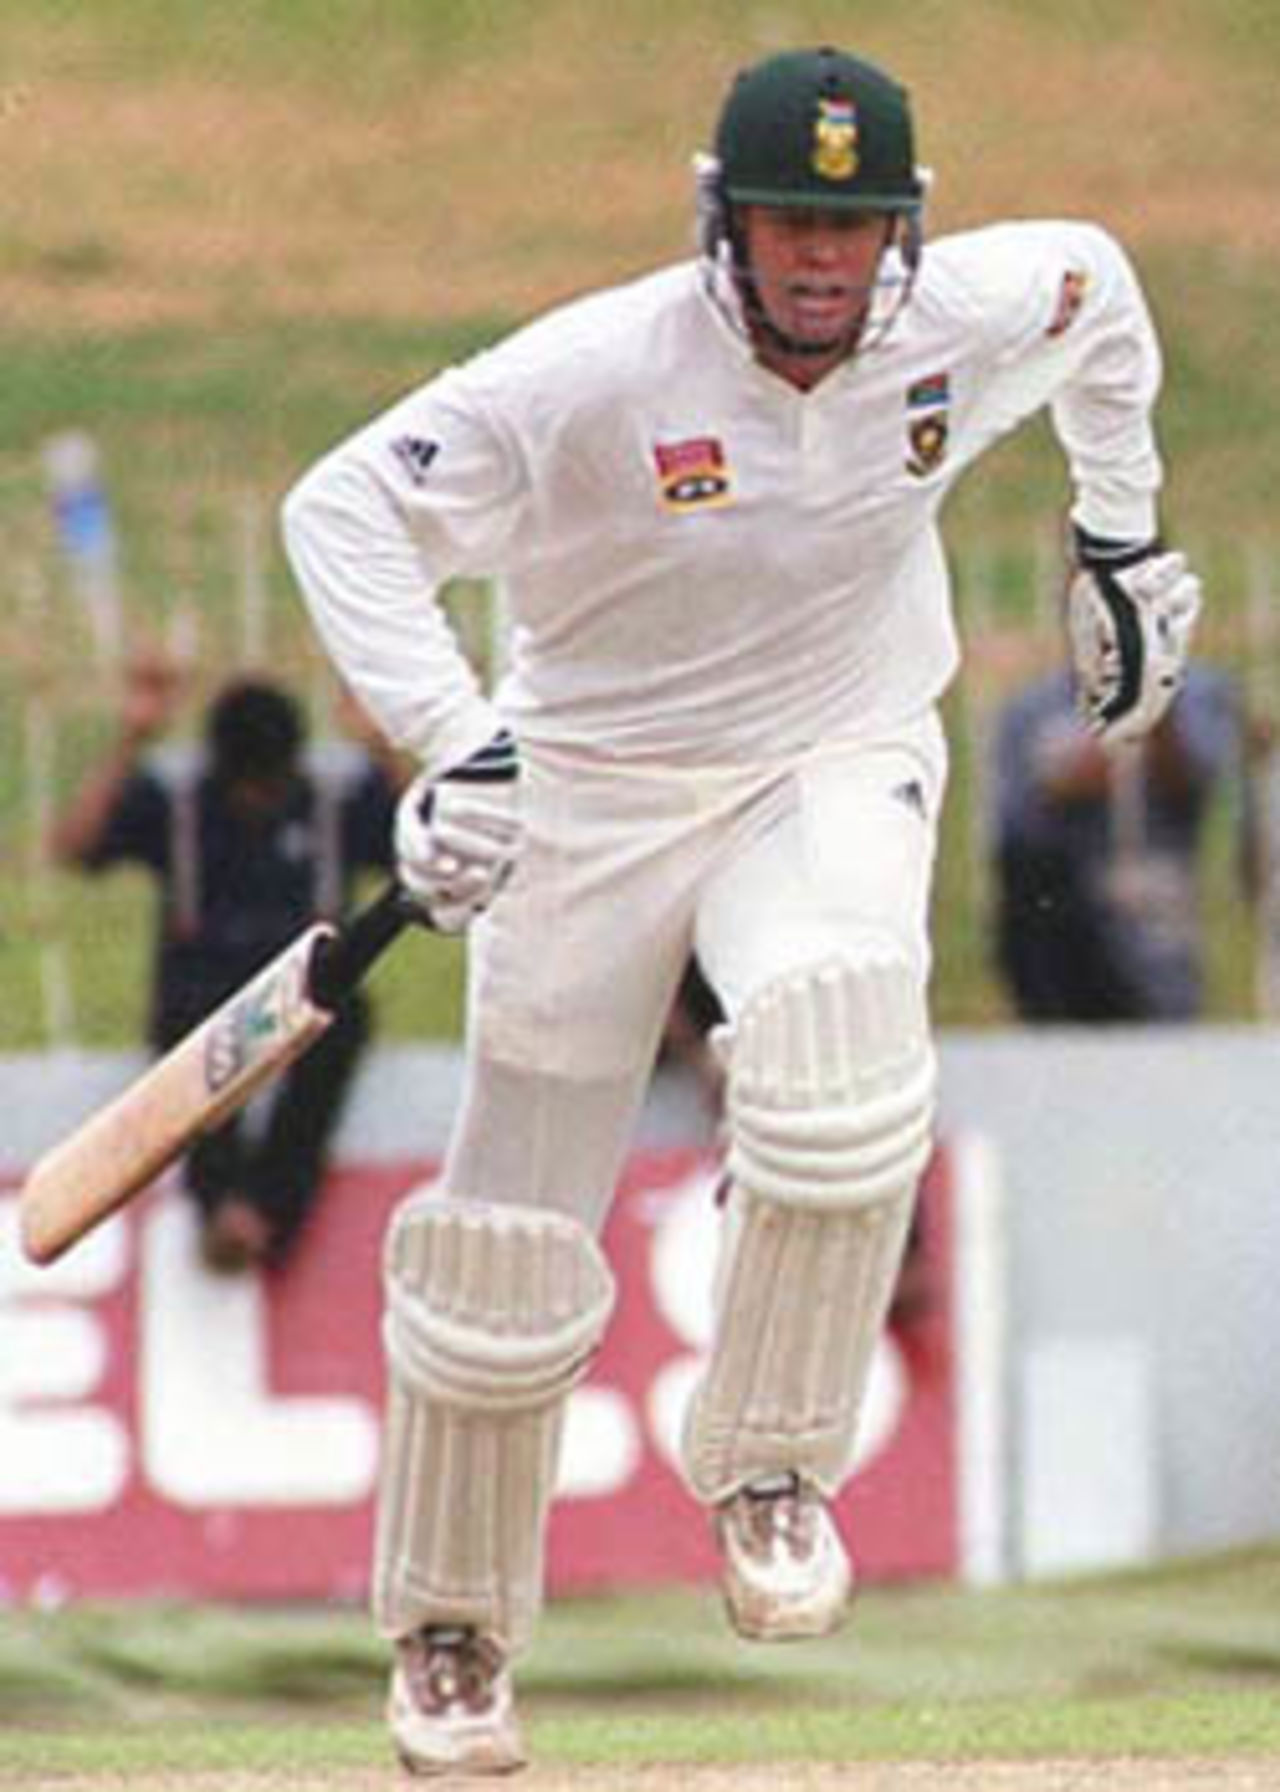 Shaun Pollock takes a quick single, South Africa in Sri Lanka, 2000/01, 3rd Test, Sri Lanka v South Africa, Sinhalese Sports Club Ground, Colombo, 06-10 August 2000 (Day 1).